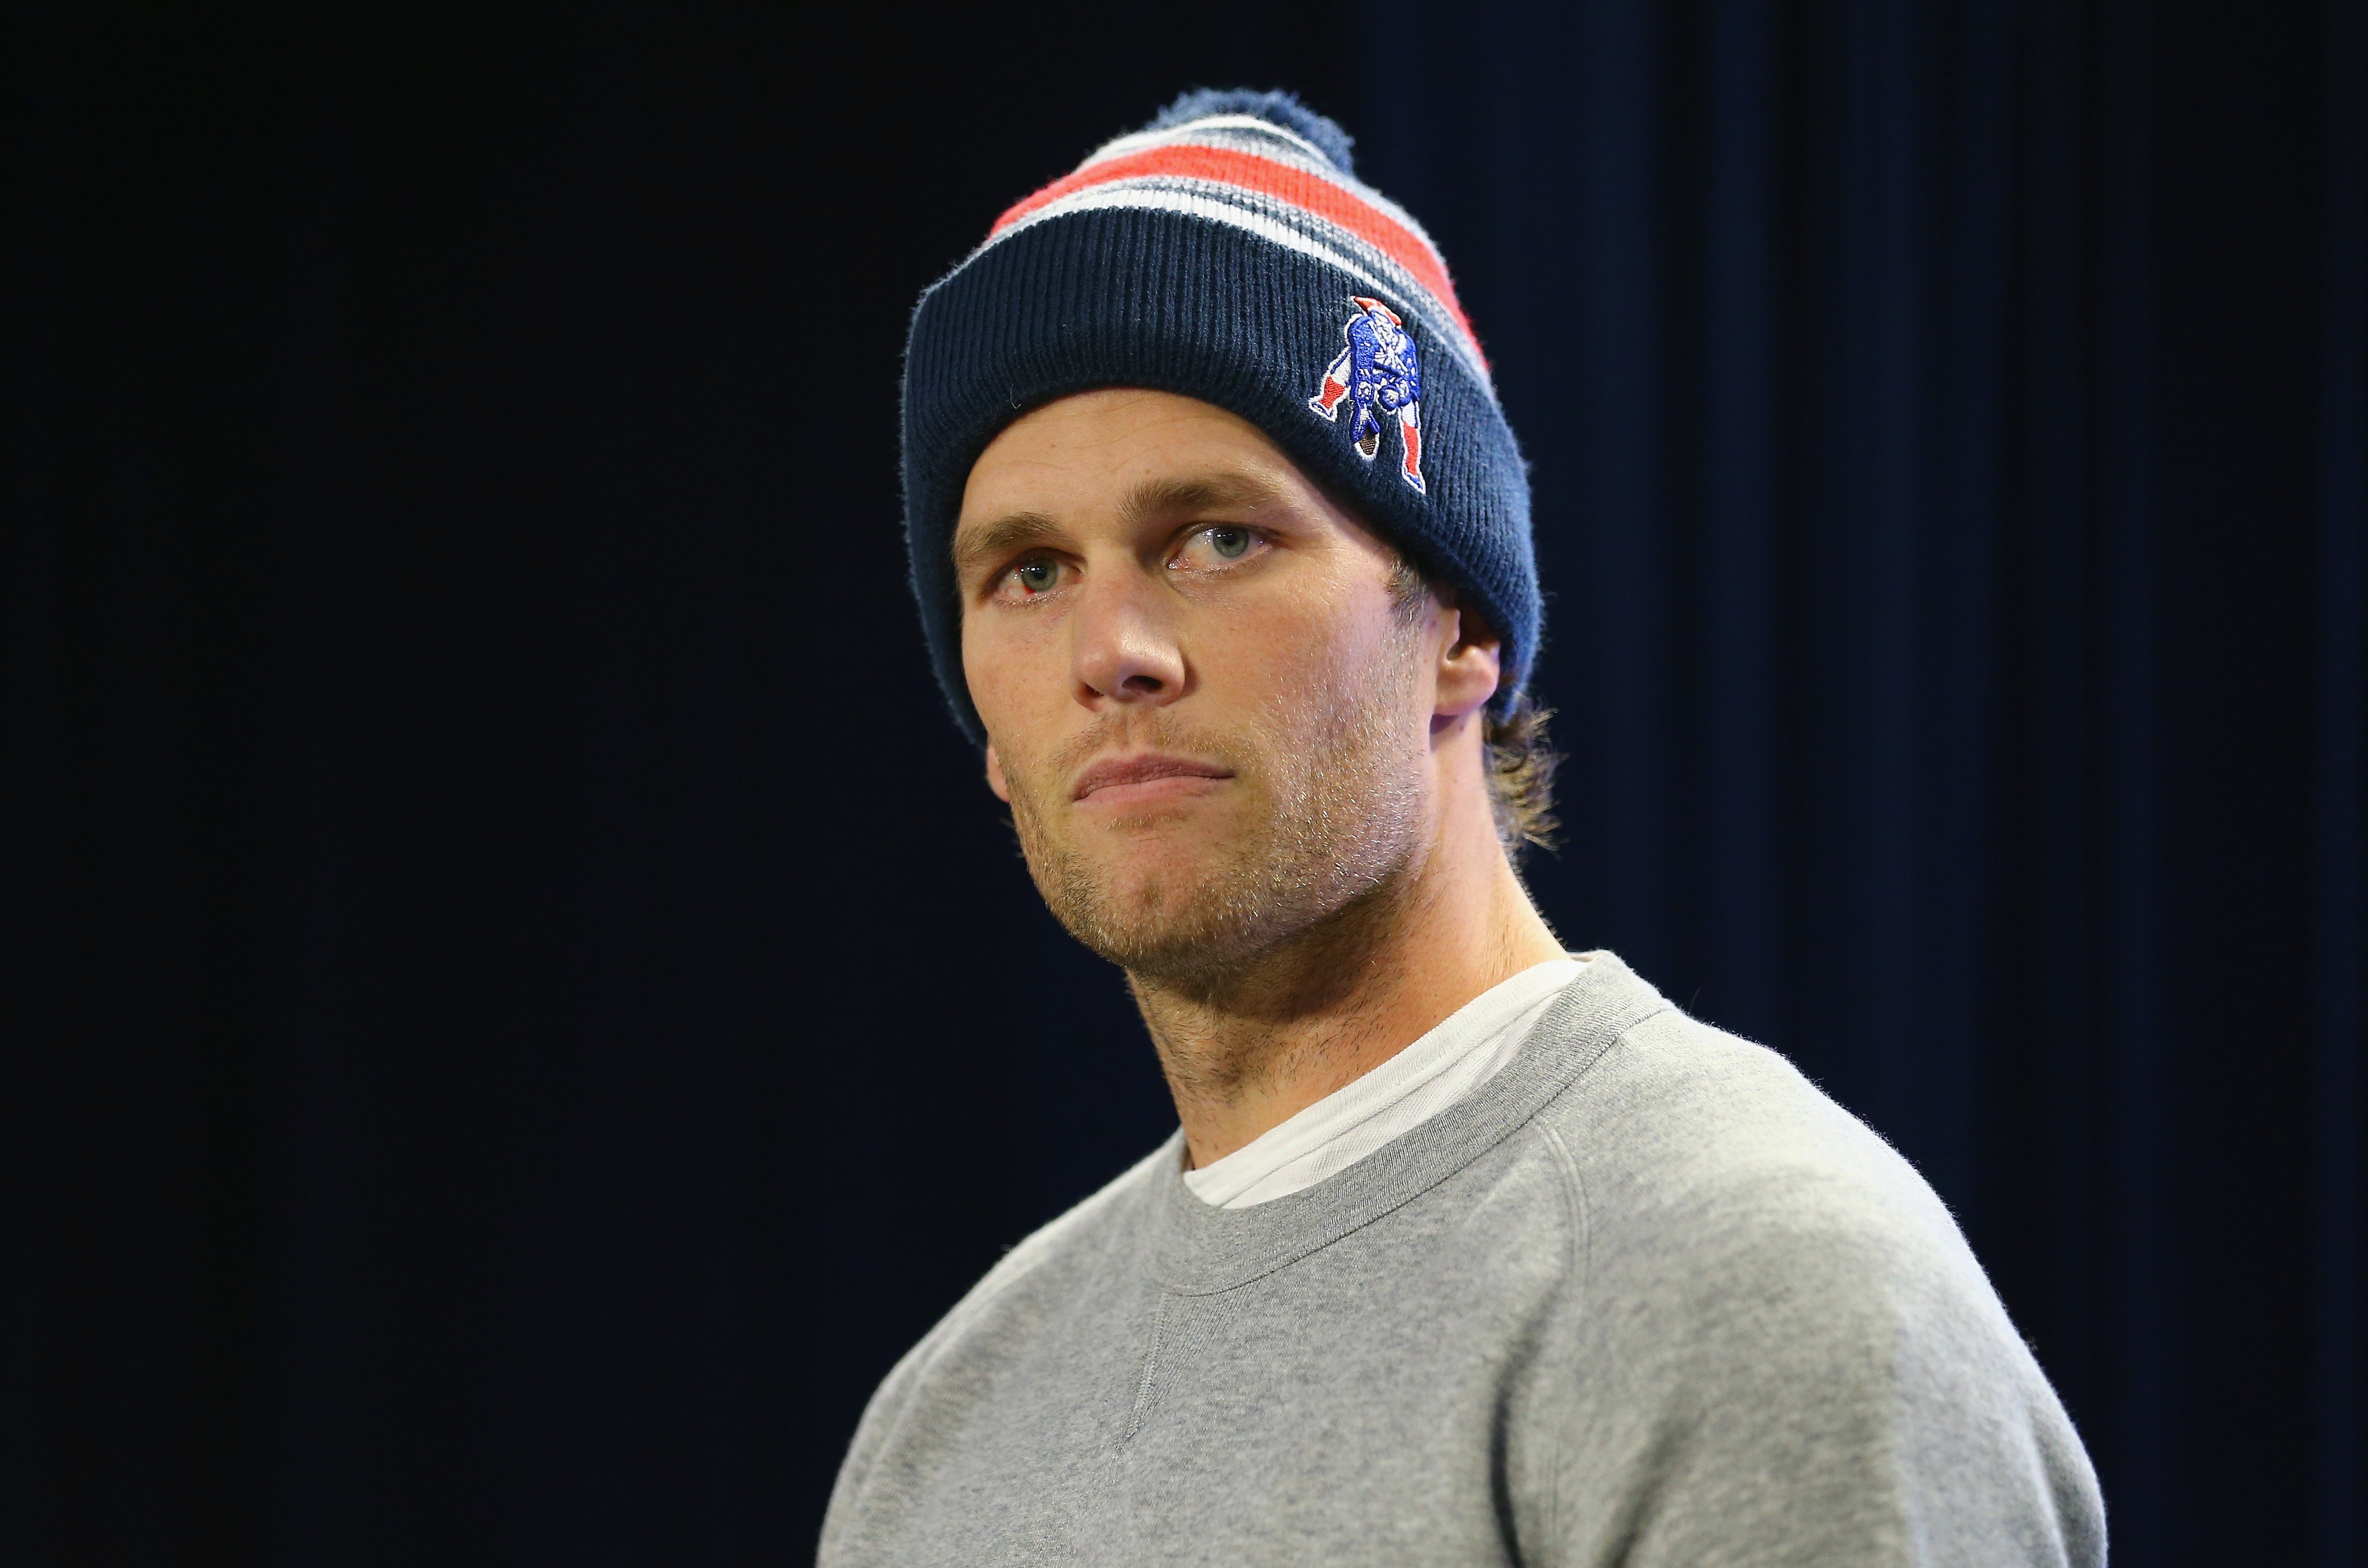  Tom Brady talks to the media during a press conference to address the under inflation of footballs used in the AFC championship game at Gillette Stadium on January 22, 2015 | Photo: GettyImages